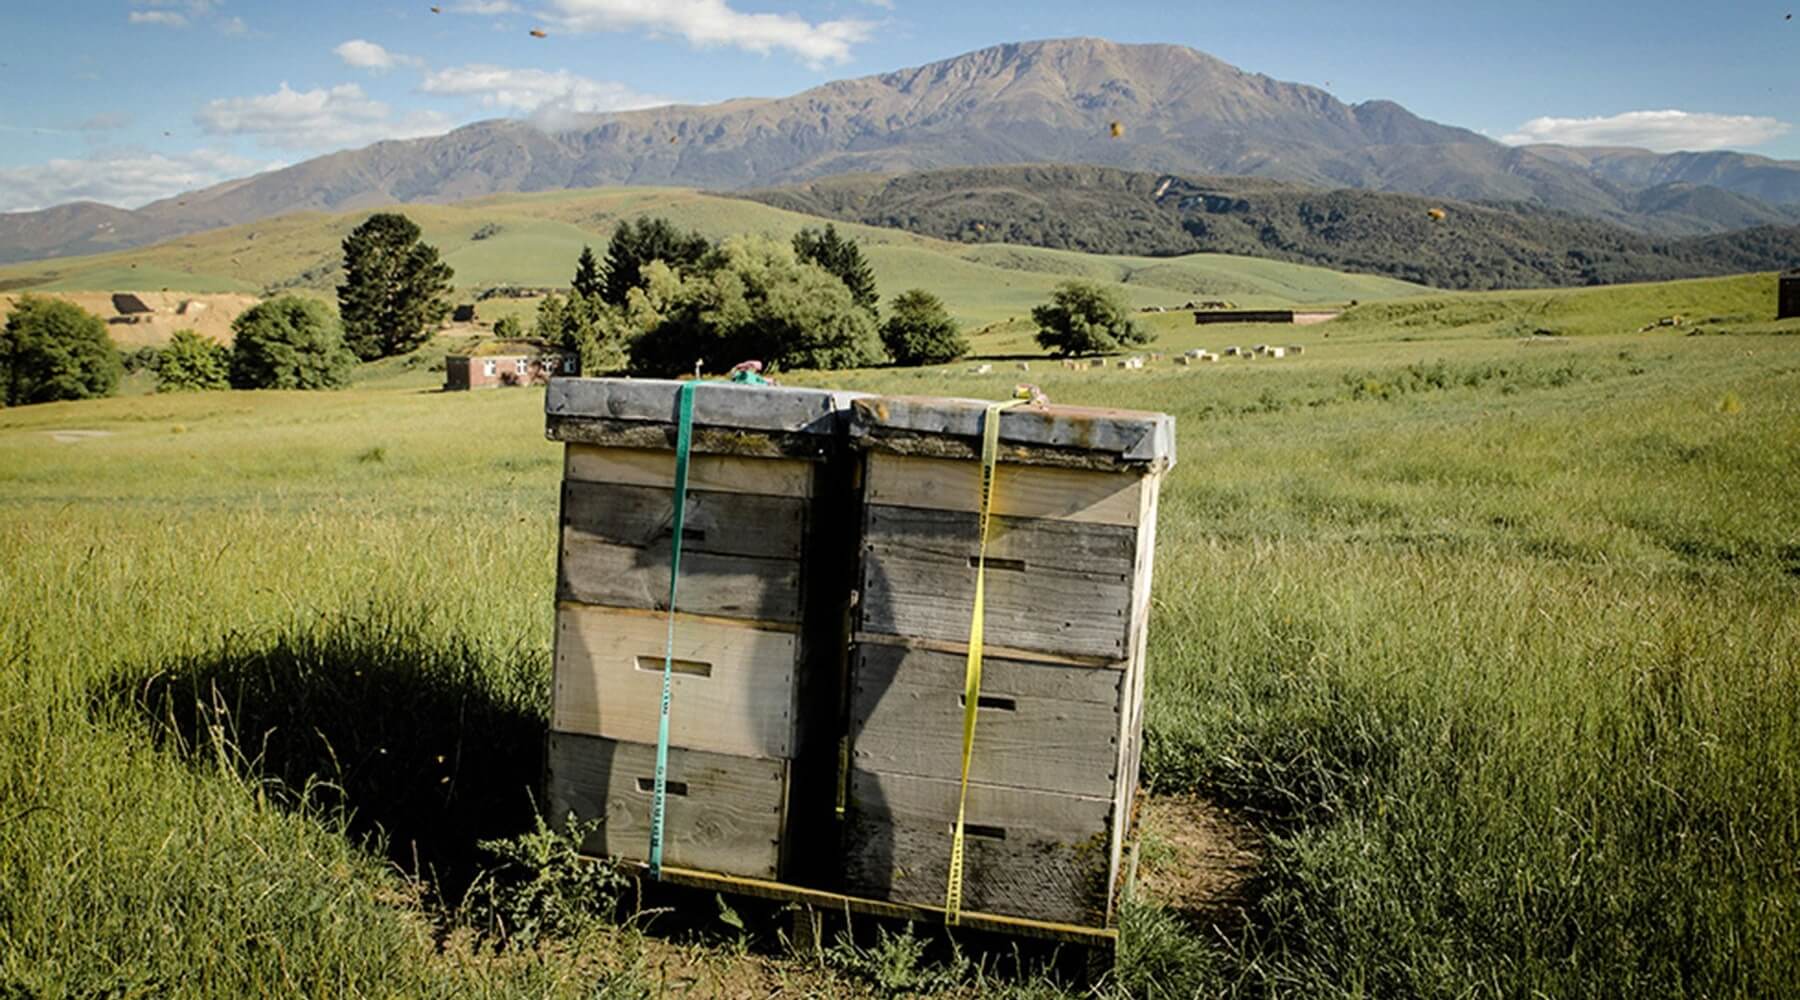 Where Does The Best Manuka Honey Come From? - PURITI